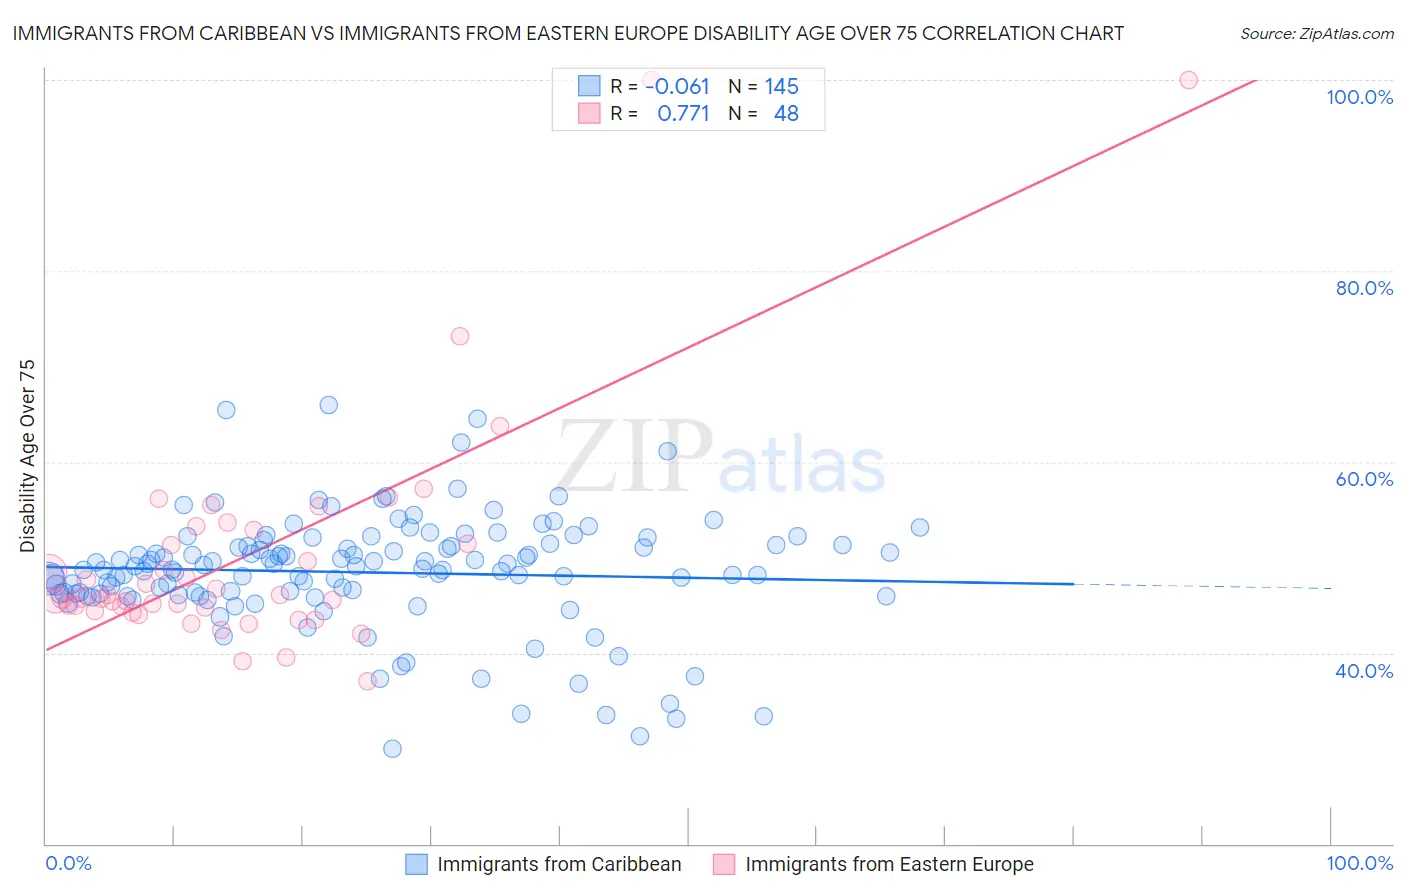 Immigrants from Caribbean vs Immigrants from Eastern Europe Disability Age Over 75